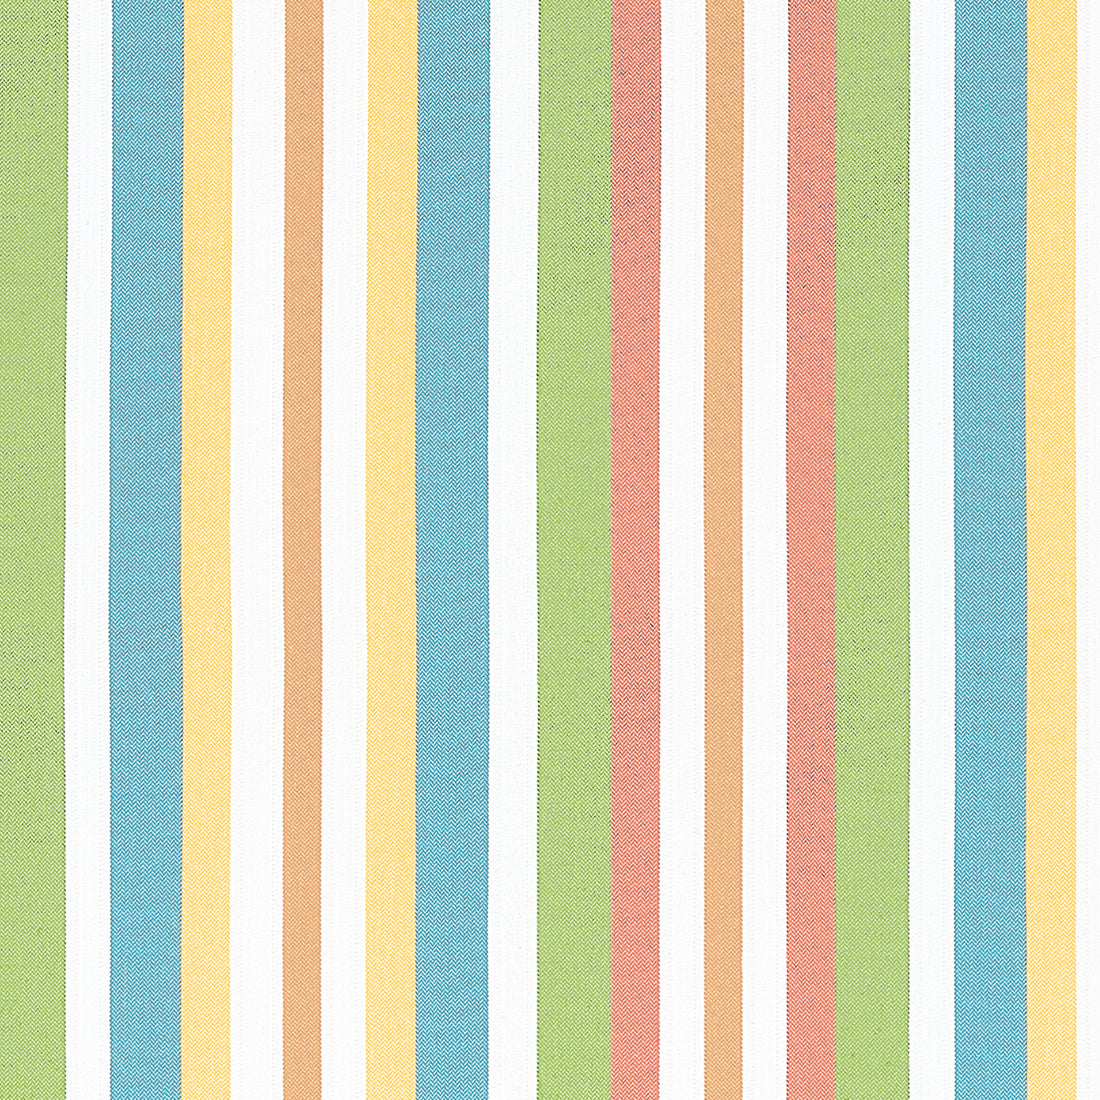 Kalea Stripe fabric in jungle color - pattern number W81666 - by Thibaut in the Locale collection